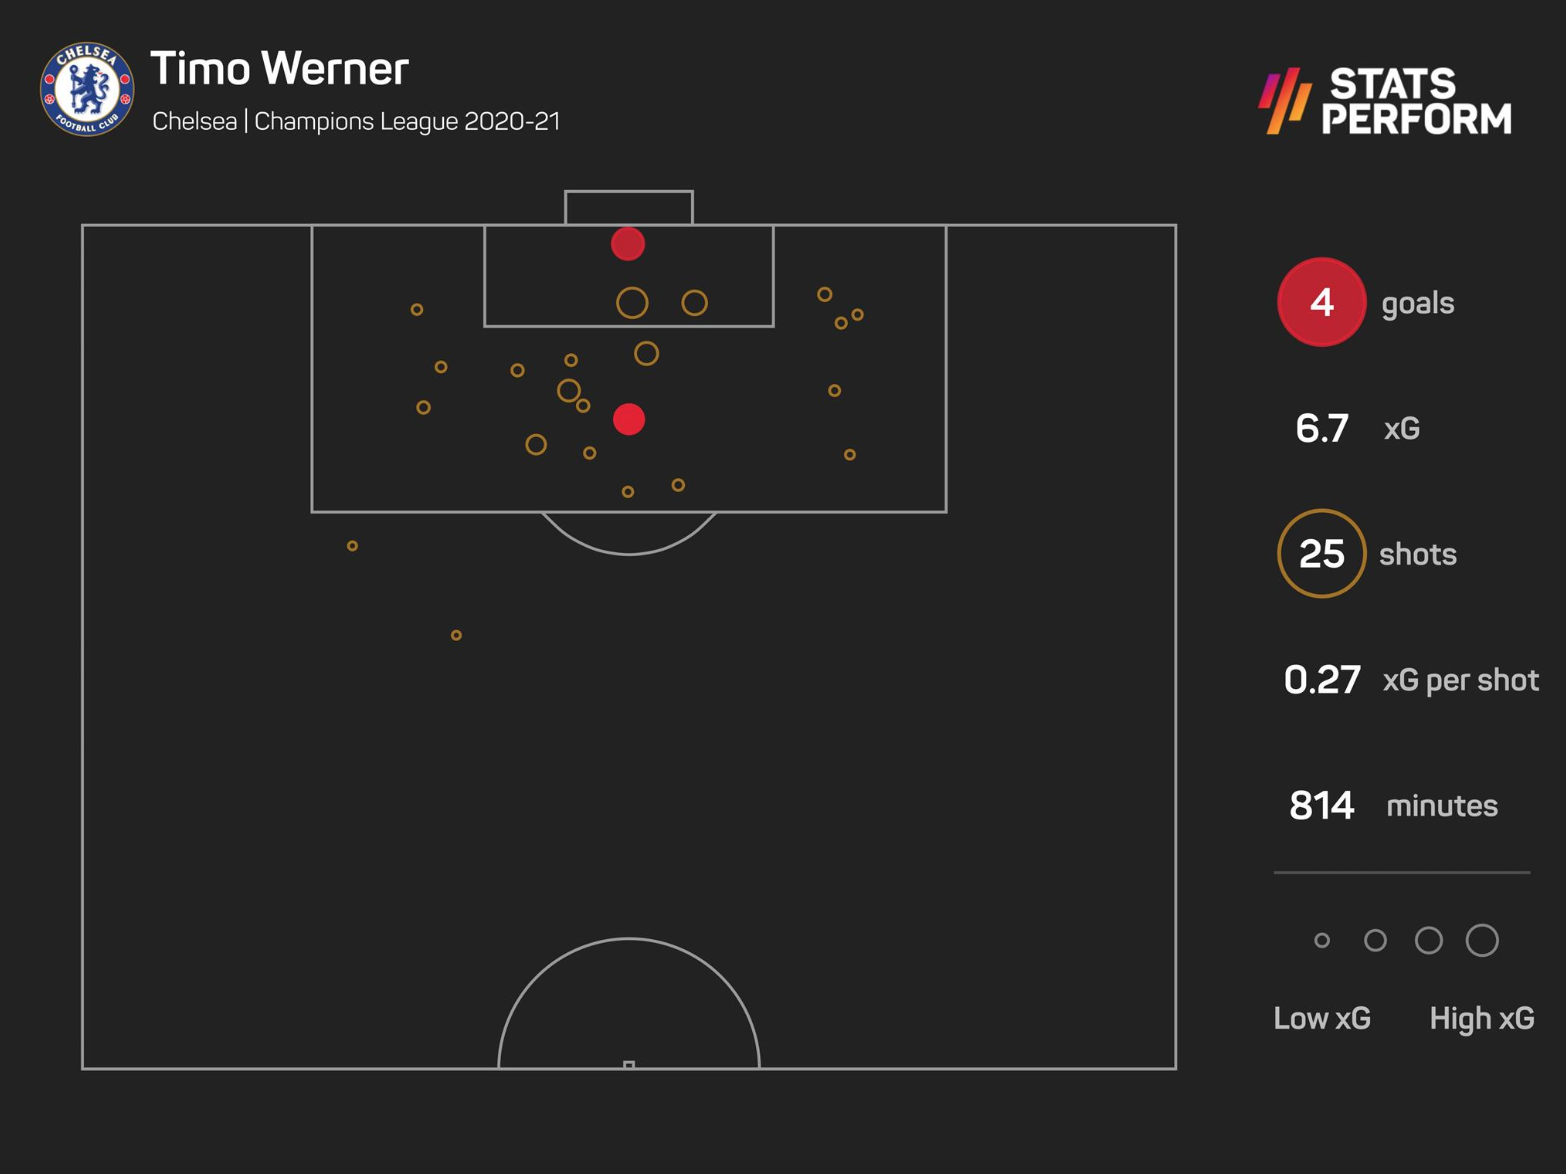 Timo Werner's Champions League xG, 2020-21